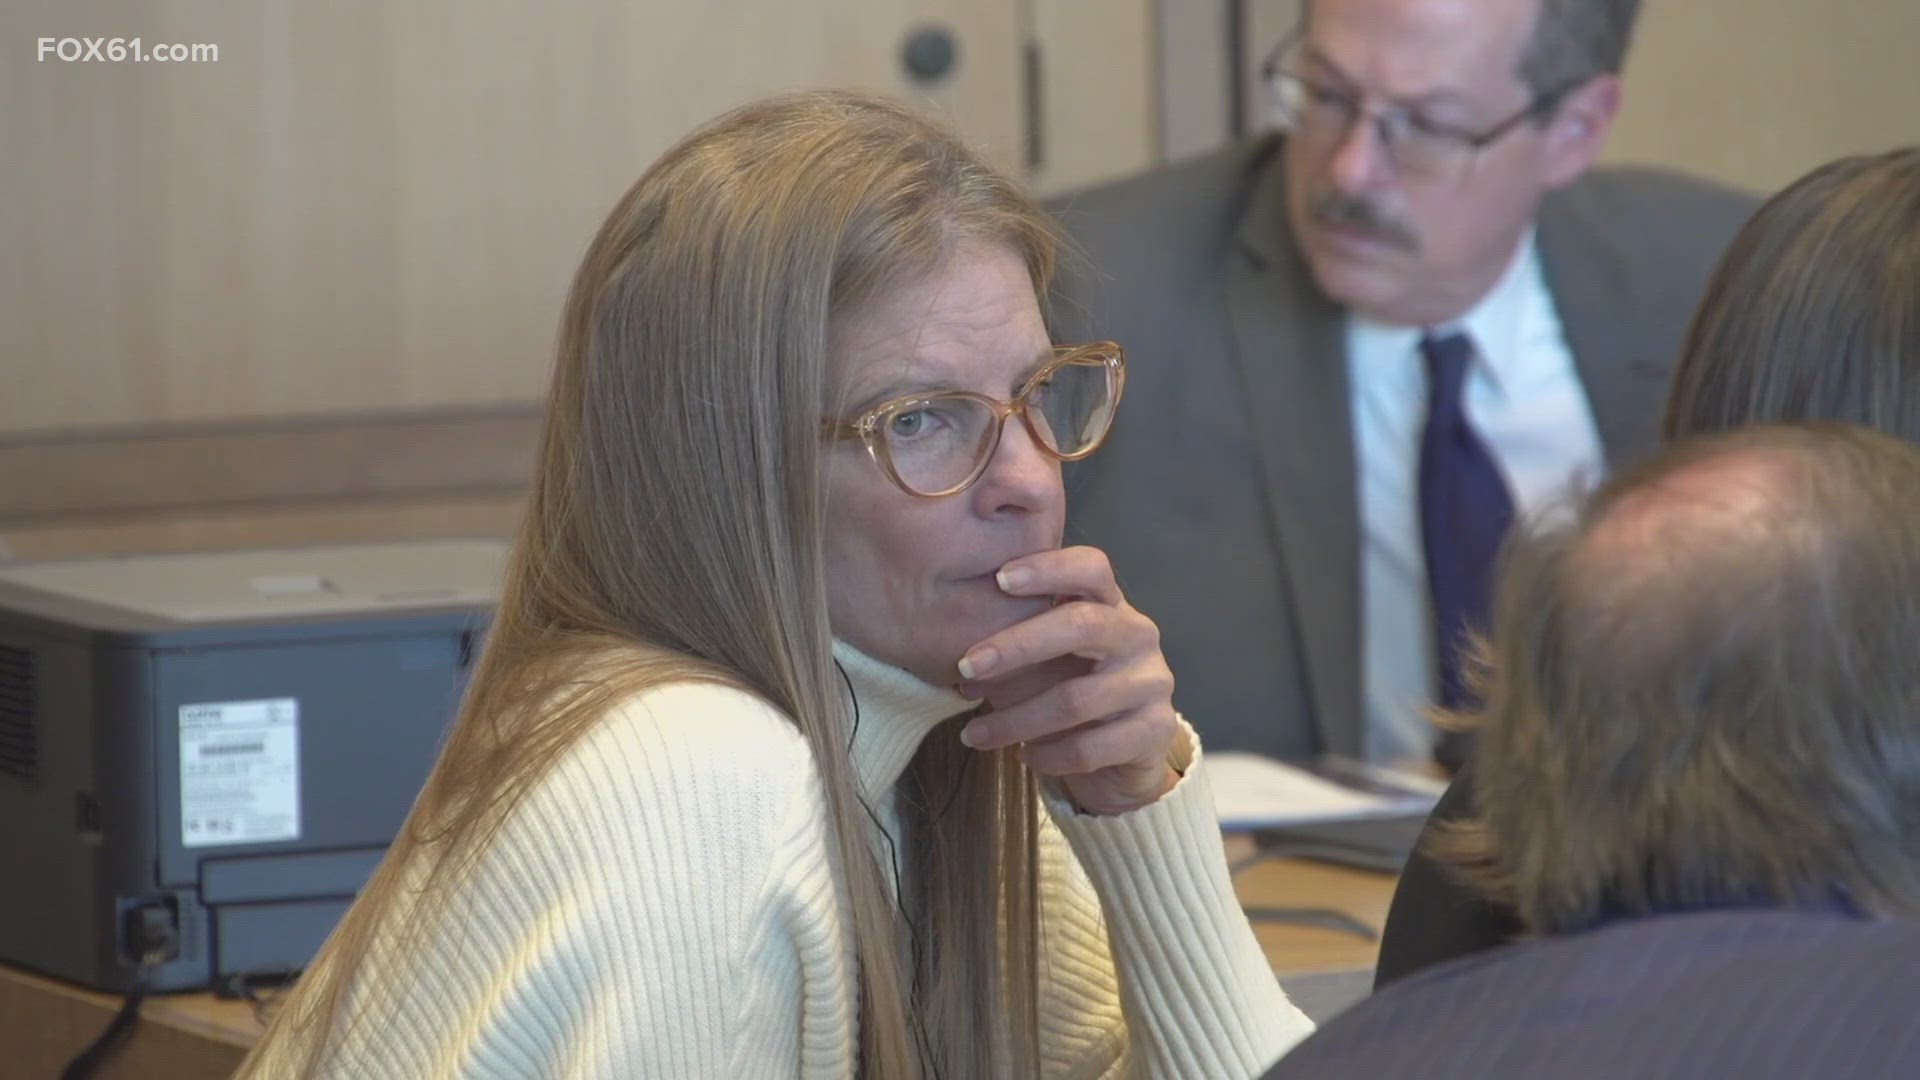 Testimony on day two mostly consisted of what evidence investigators collected in Jennifer Dulos' garage in the days following her disappearance.